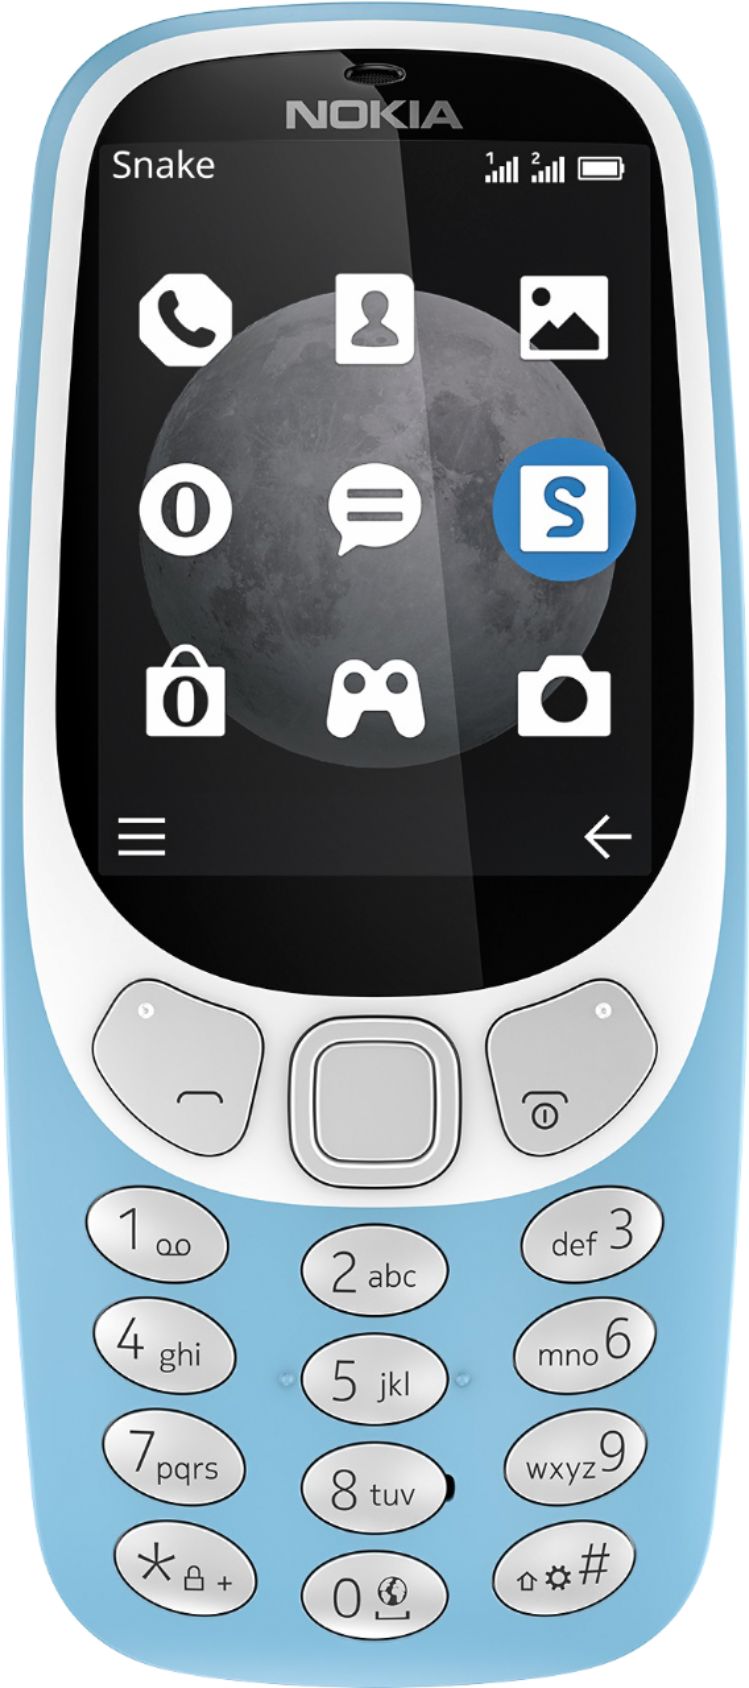 Nokia 3310 mobile phone to be re-launched after being dubbed 'most reliable  phone ever